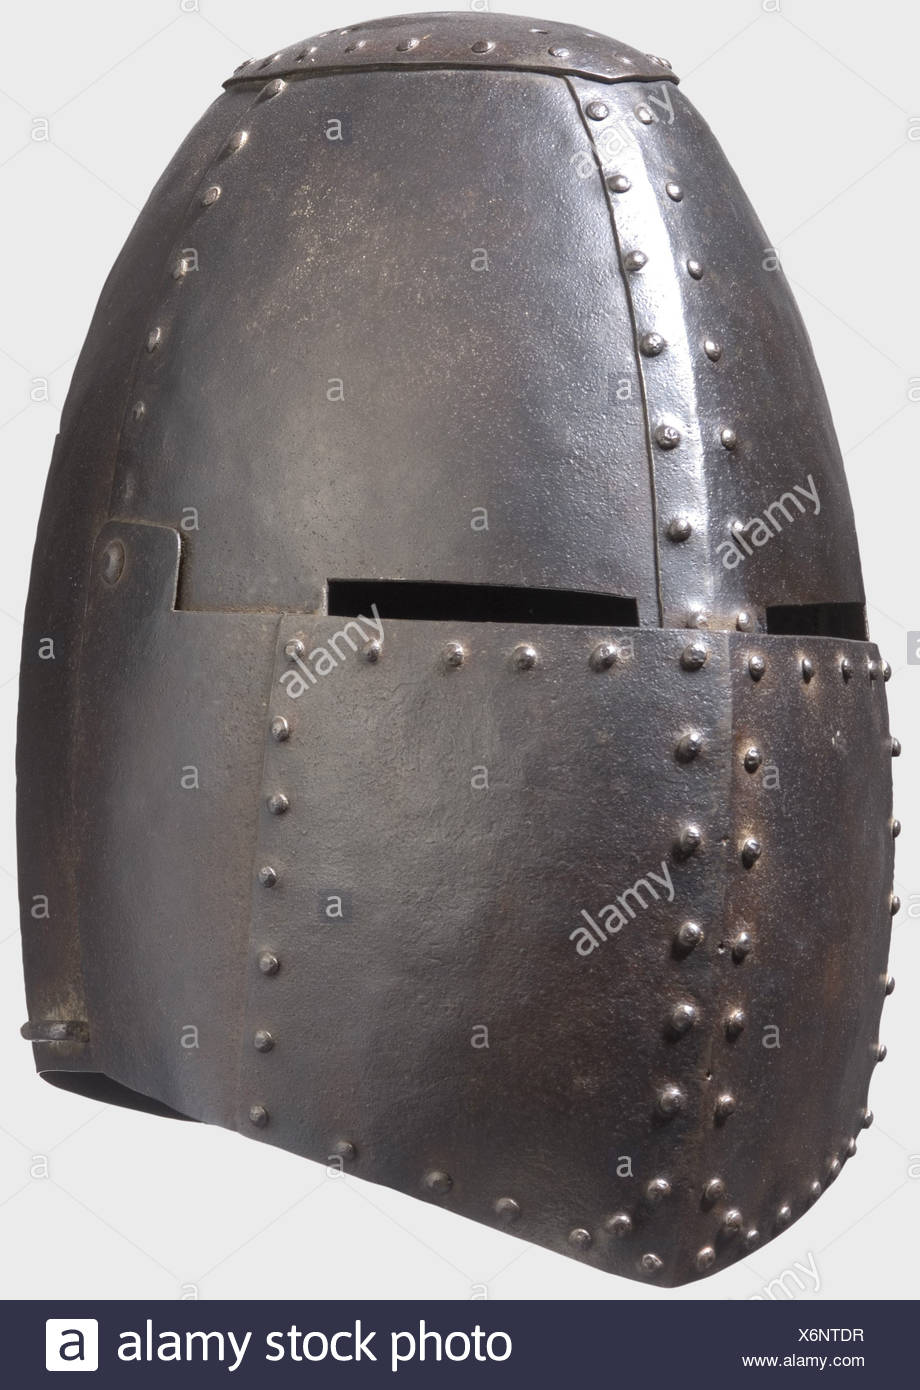 A great helm, Historismus Period in the style of the 1st half of the 14th  century. Helmet made of several pieces of riveted iron plates. Oval crown  piece with four double holes